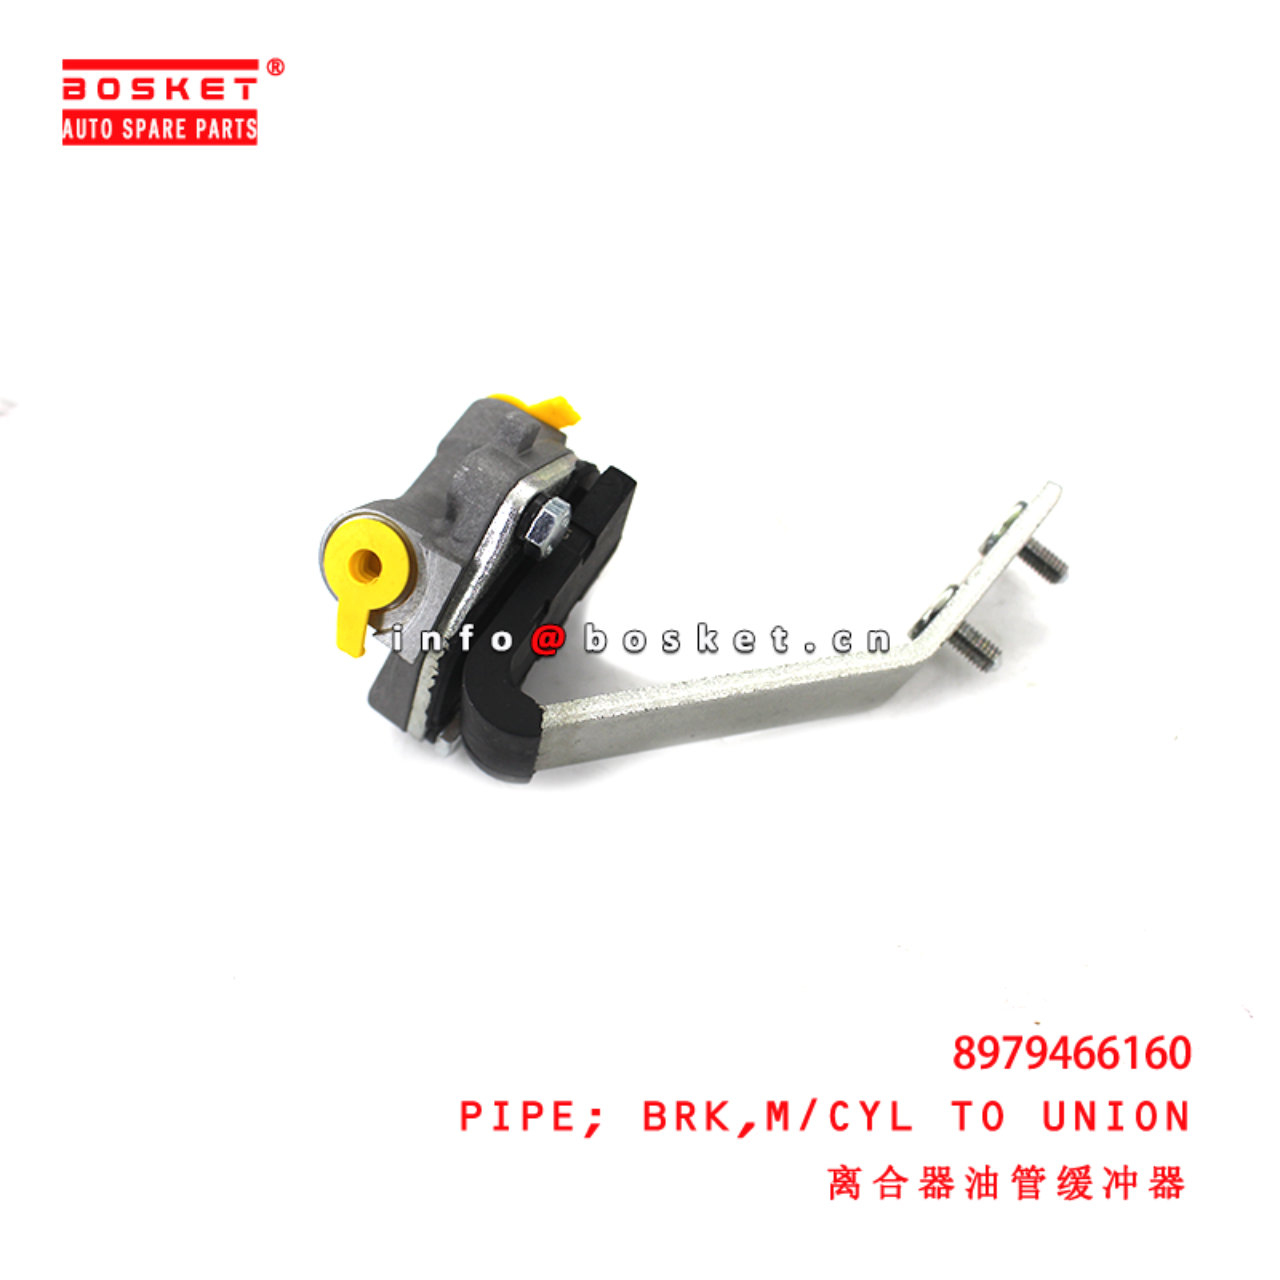 8-97946616-0 Master Cylinder To Union Brake Pipe suitable for ISUZU D-MAX  8979466160